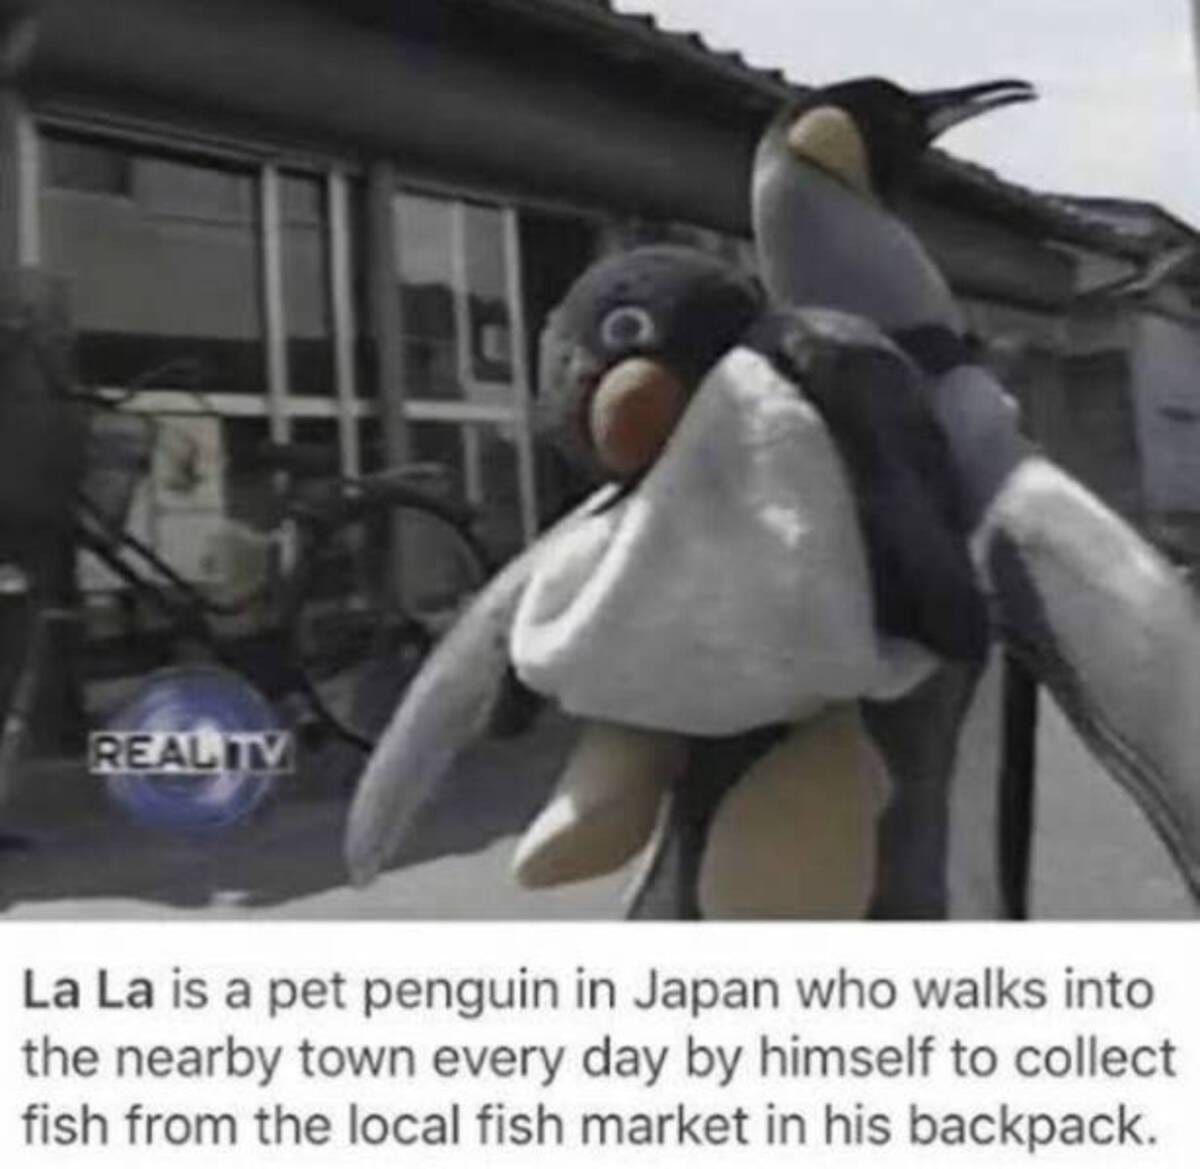 Picture of a Penguin wearing a penguin backpack. Caption reads: La La is a pet penguin in Japan who walks into the nearby town every day himself to colect fish from the local fish market in his backpack.